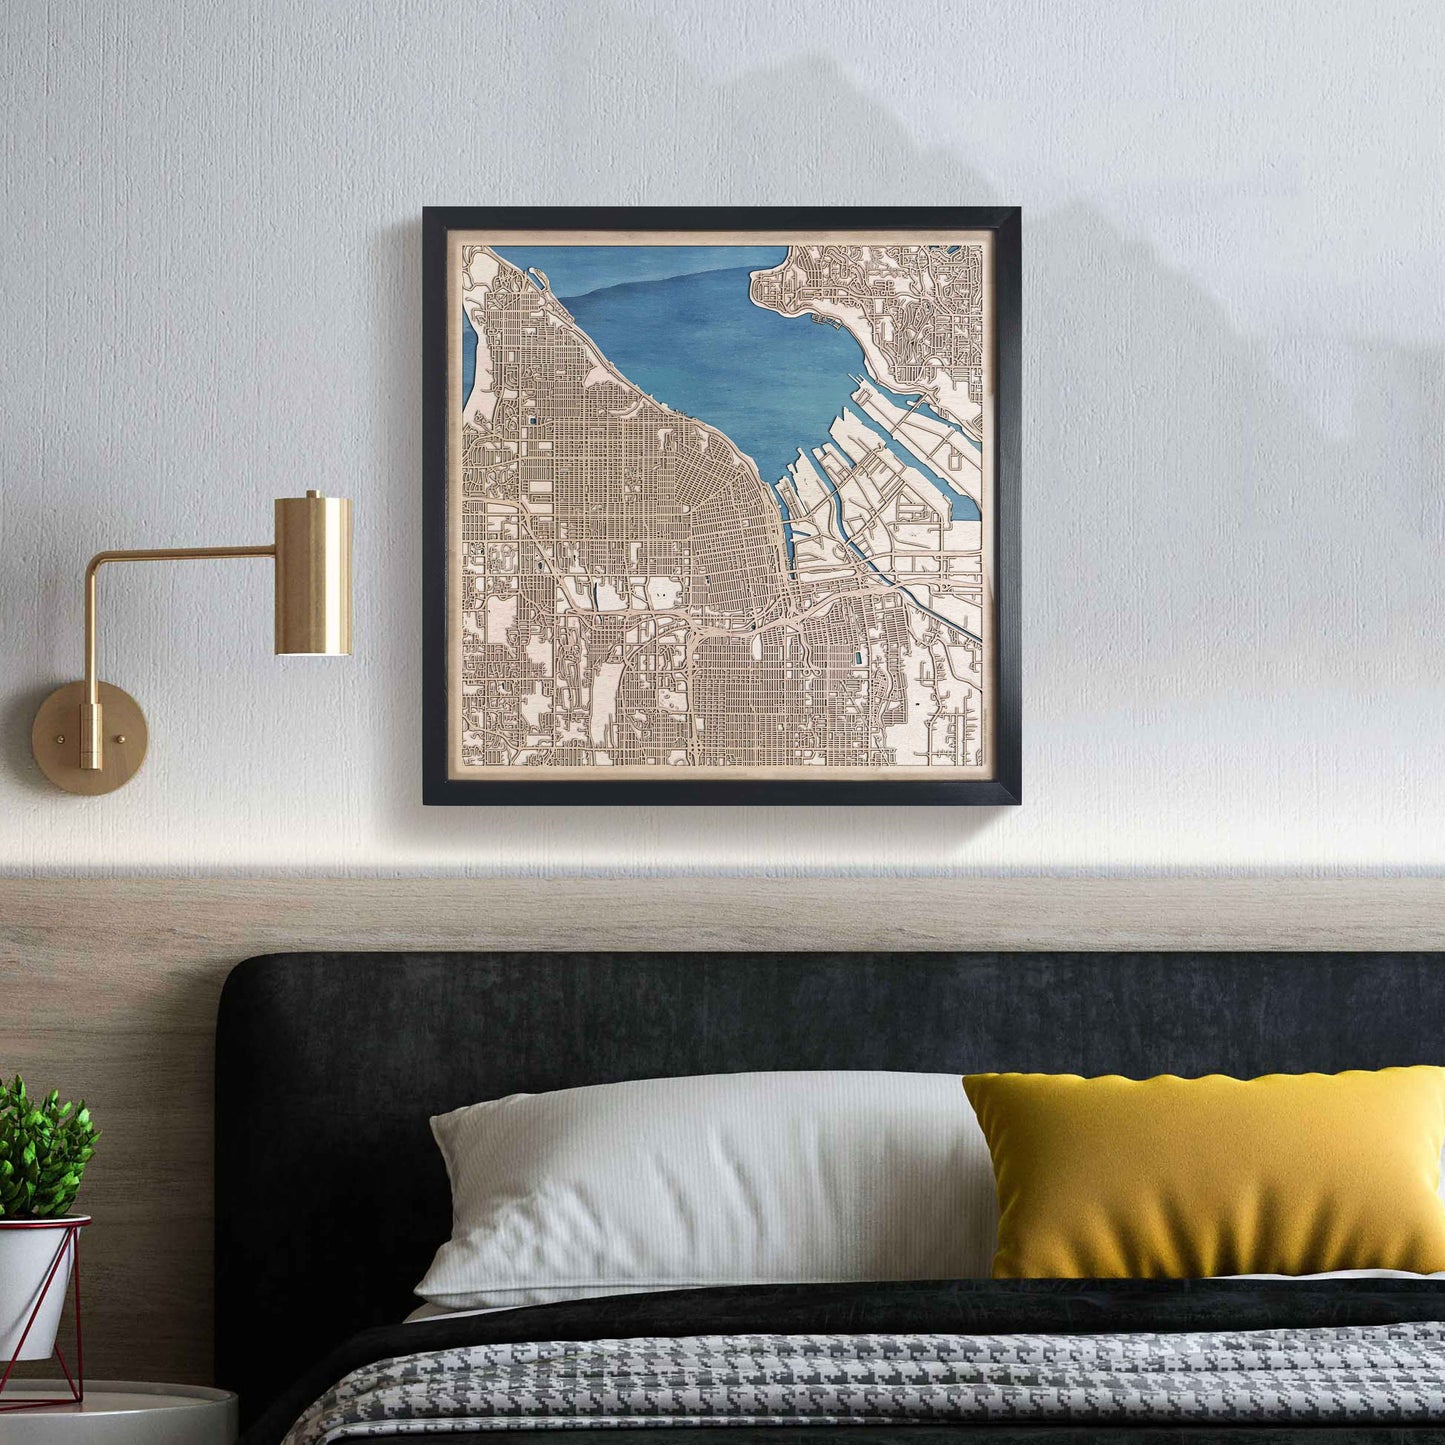 Tacoma Wooden Map by CityWood - Custom Wood Map Art - Unique Laser Cut Engraved - Anniversary Gift